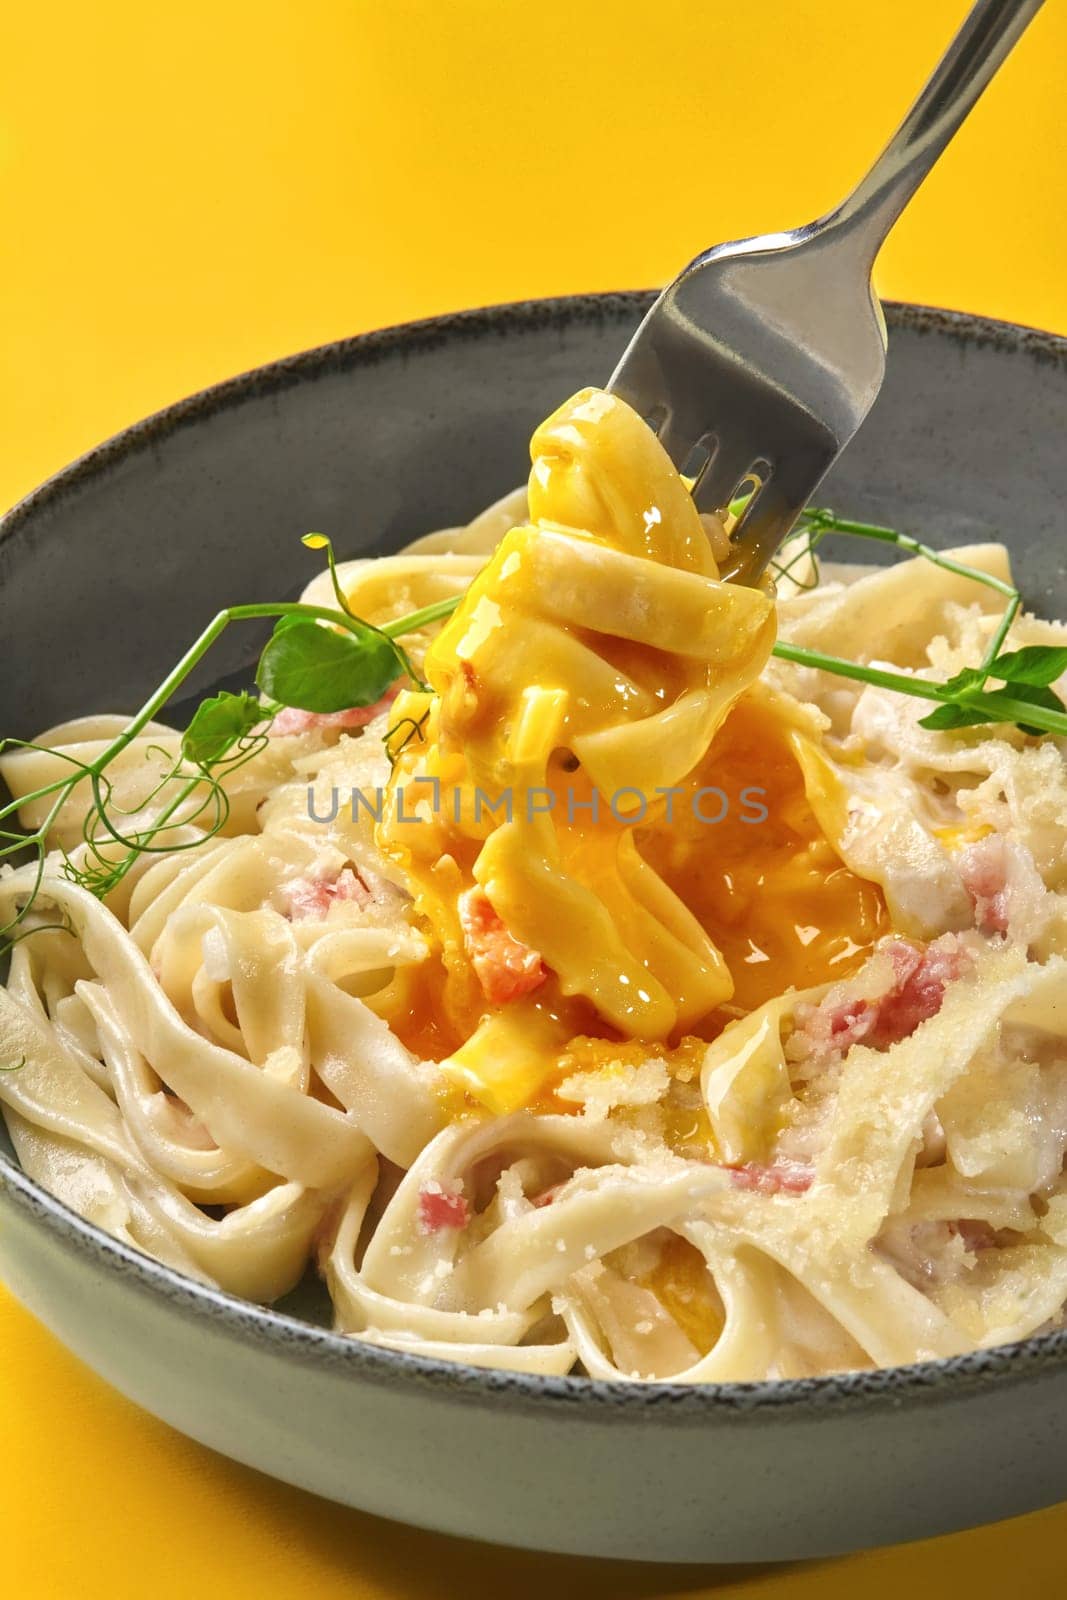 Fork raising portion of creamy fettuccine carbonara with guanciale pieces covered with velvety egg yolk, grated parmesan, and delicate herbs. Delicious dish of Italian cuisine